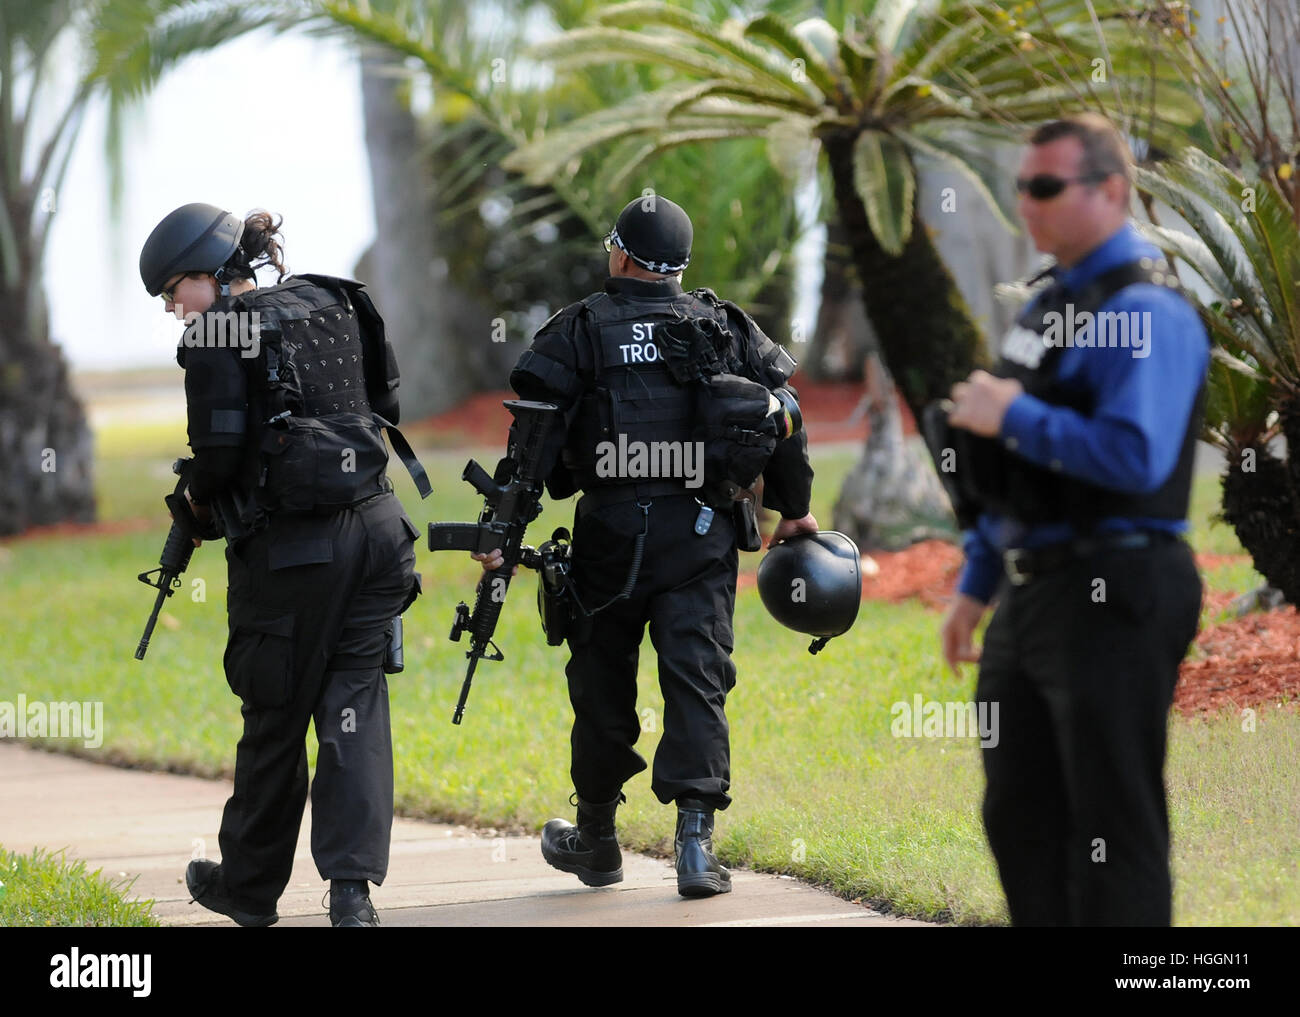 Orlando, USA. 09th Jan, 2017.  Police search the Tzadik Brookside apartment complex in Orlando, Florida for Markeith Loyd, a suspect in the shooting death of an Orlando, Florida police officer on January 9, 2017 outside an Orlando Walmart store. The suspect allegedly shot and killed Master Sergeant Debra Clayton, a 17-year veteran of the department. Loyd was also being sought for the alleged murder of his 24 year-old pregnant ex-girlfriend Sade Nixon in December. Credit: Paul Hennessy/Alamy Live News Stock Photo